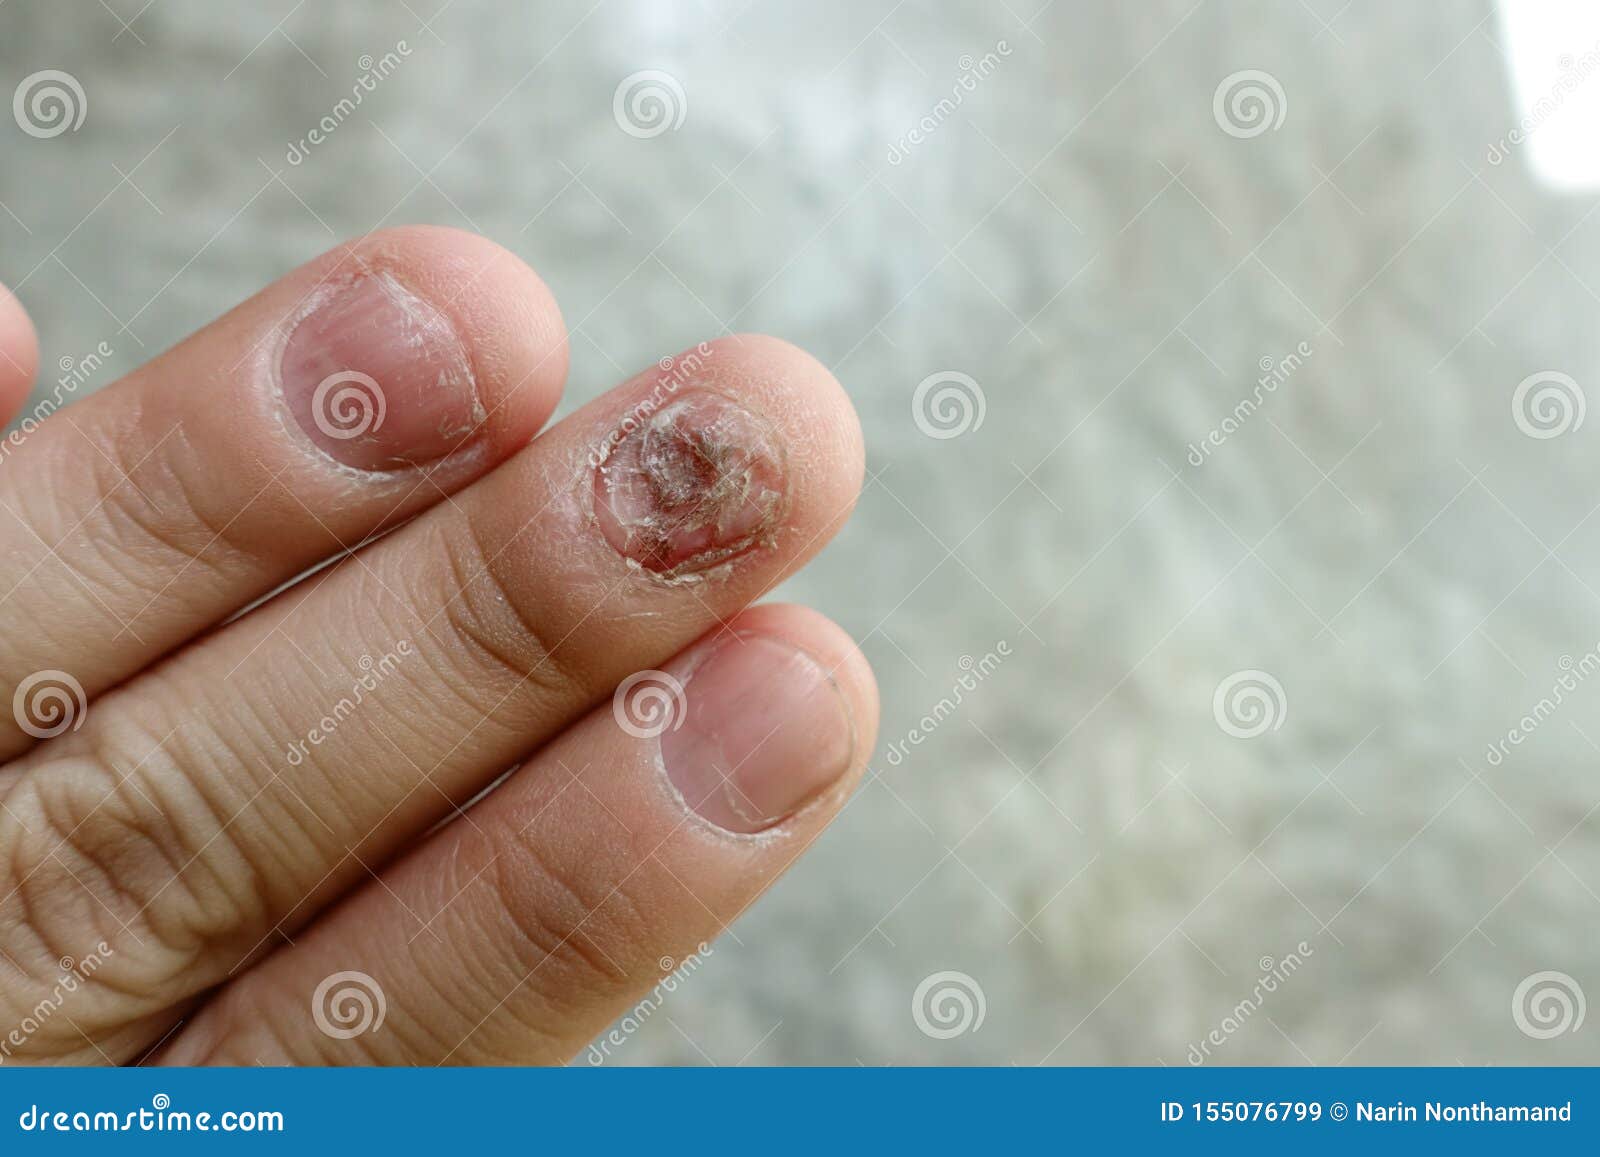 Big Close Up Of Fungus Infection On Nails Hand Finger With Onychomycosis  Fungal Infection On Nails Stock Photo - Download Image Now - iStock